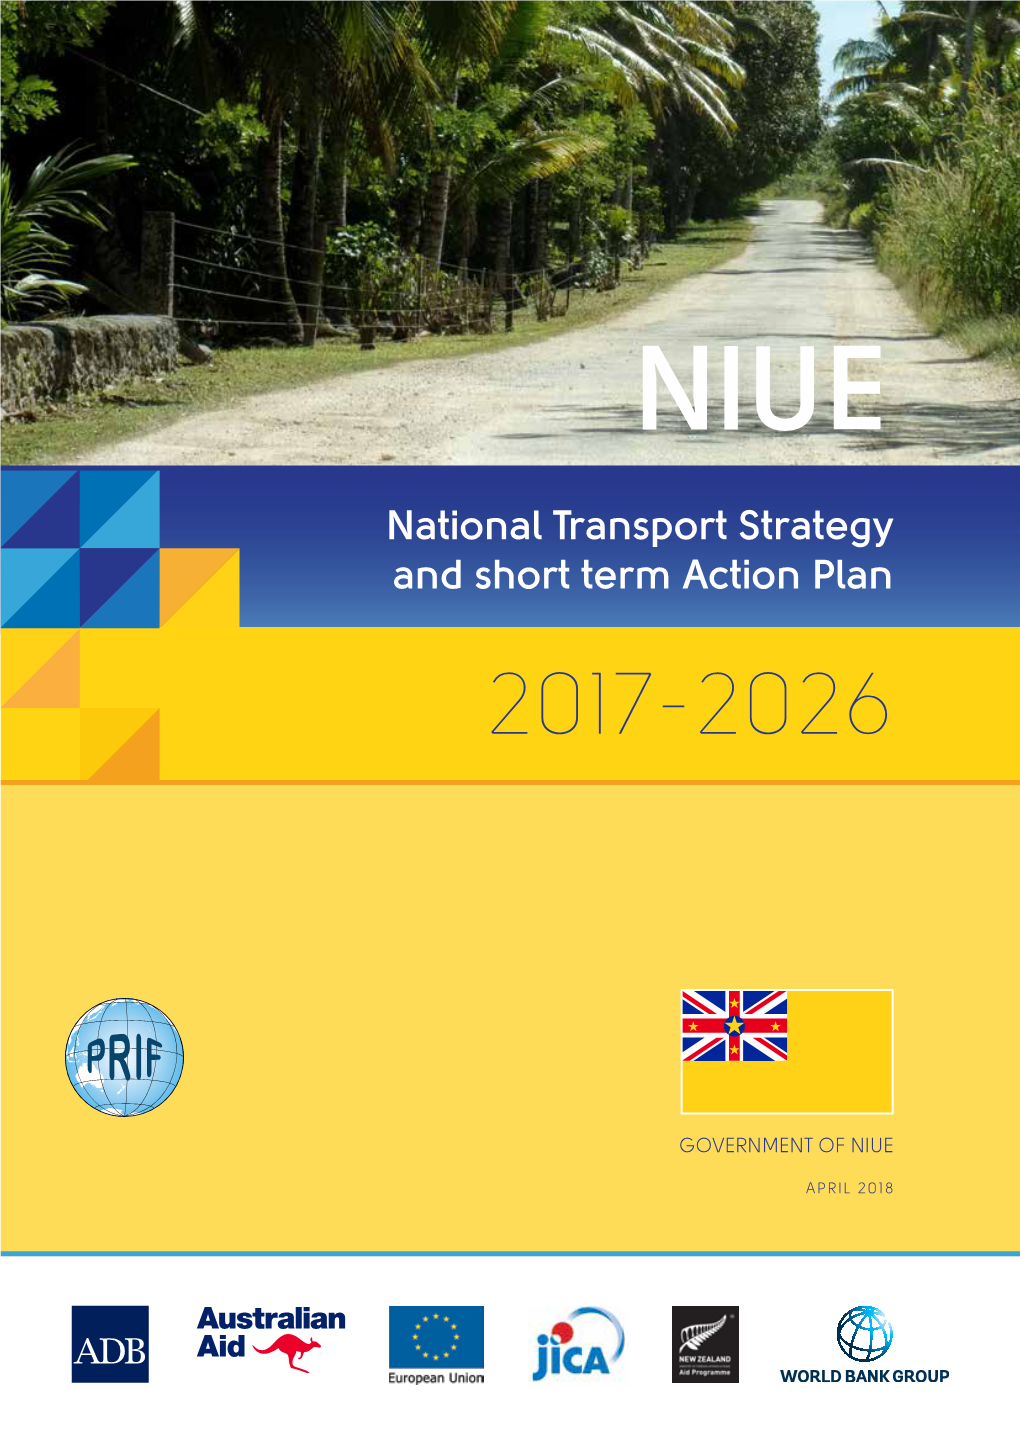 Niue Transport Strategy and Short-Term Action Plan 2017-2026